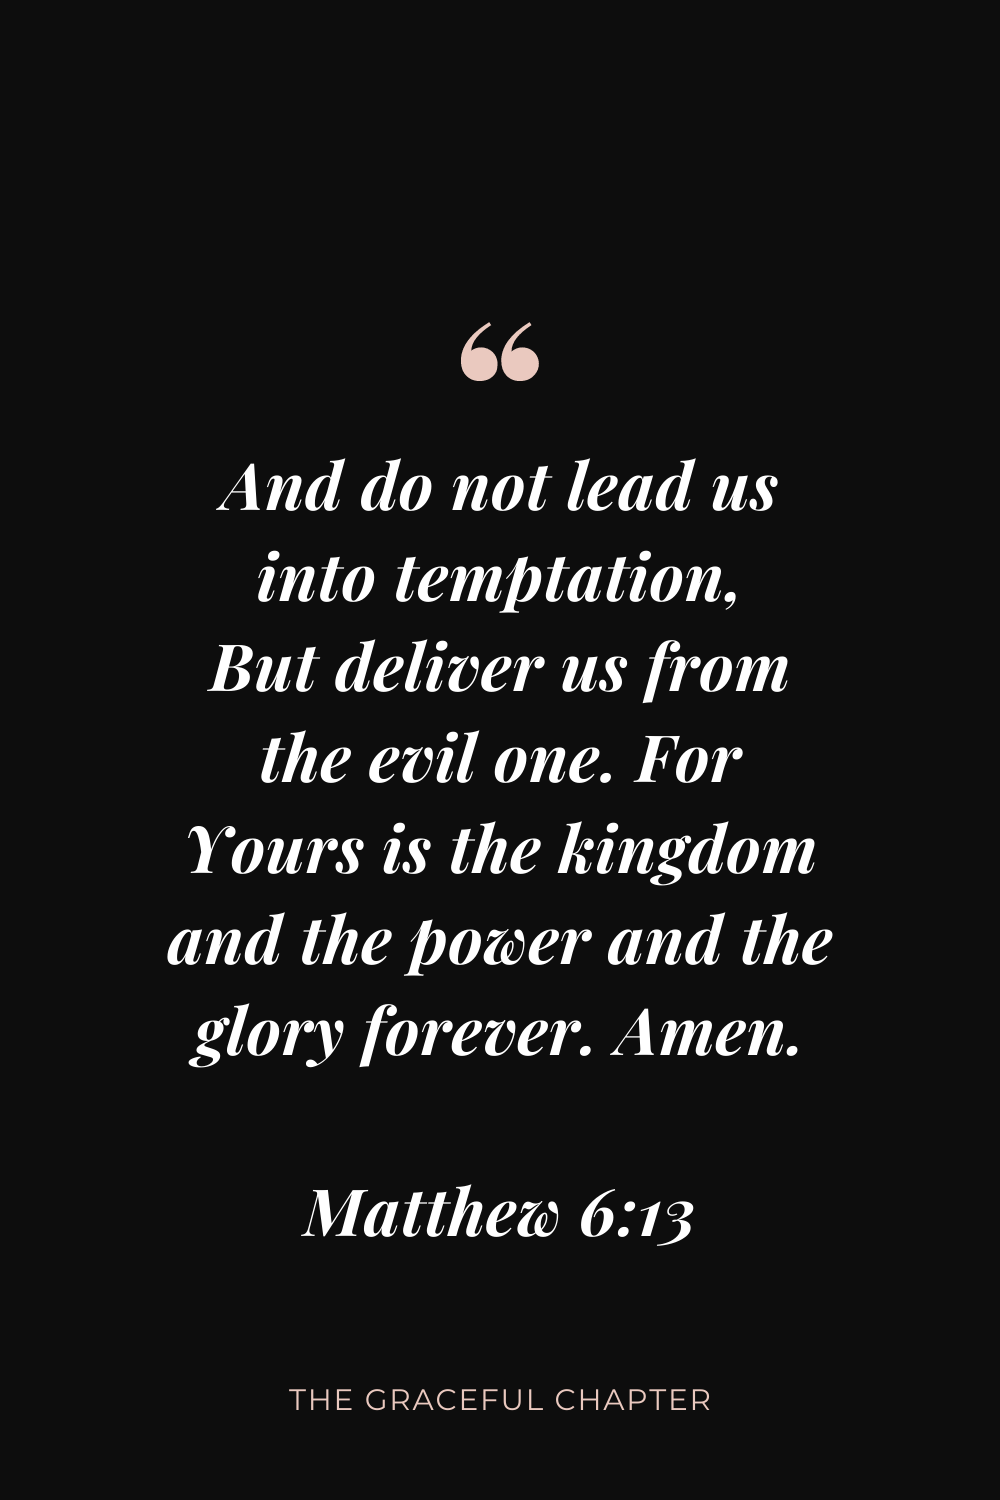 And do not lead us into temptation, But deliver us from the evil one. For Yours is the kingdom and the power and the glory forever. Amen. Matthew 6:13